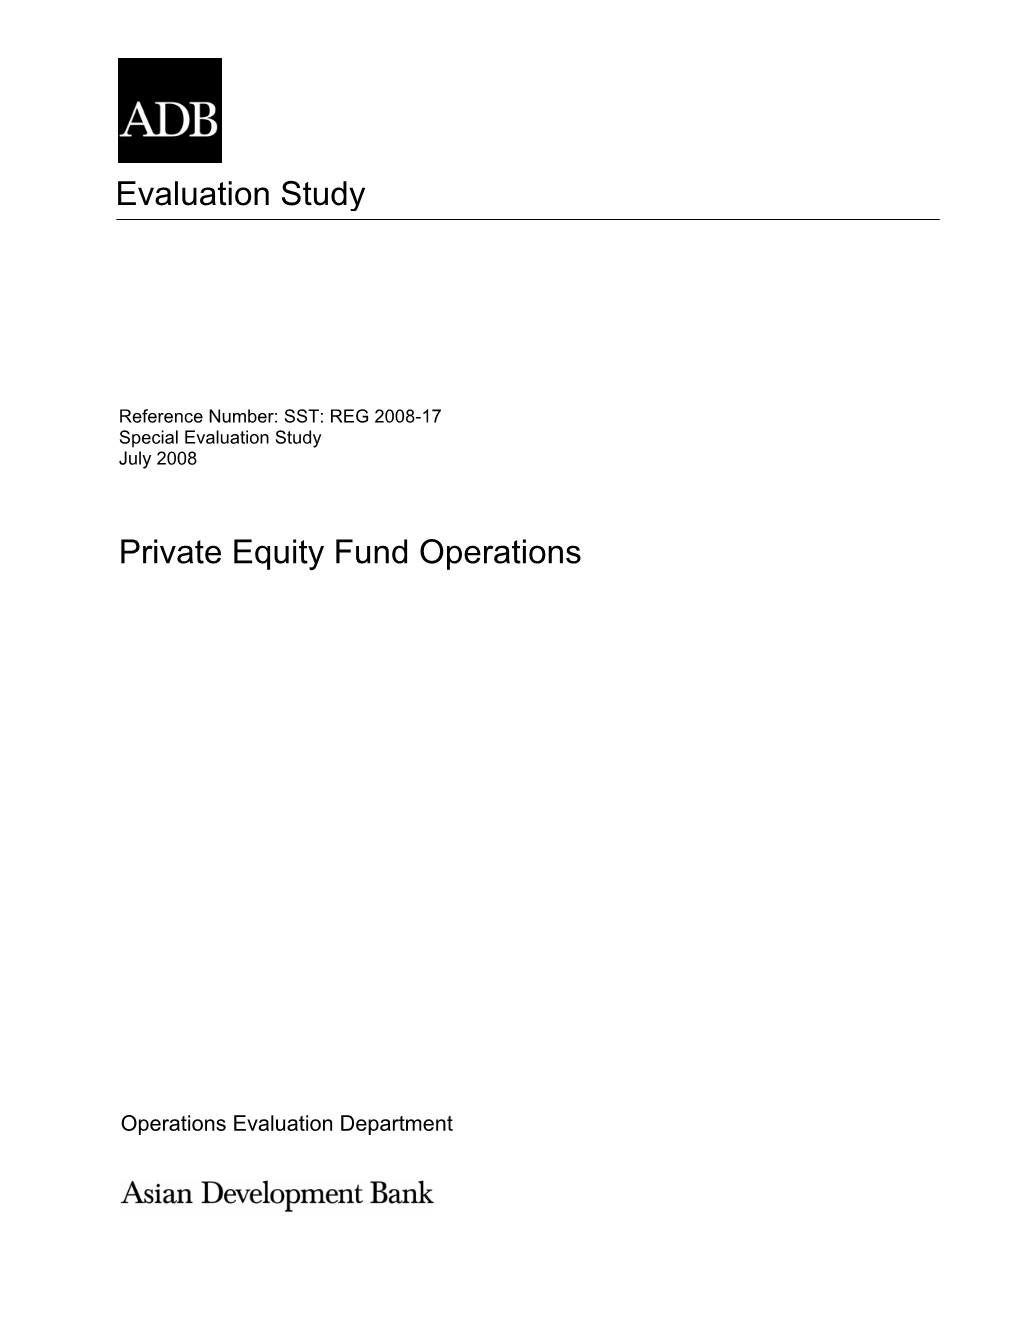 Special Evaluation Study on Private Equity Fund Operations